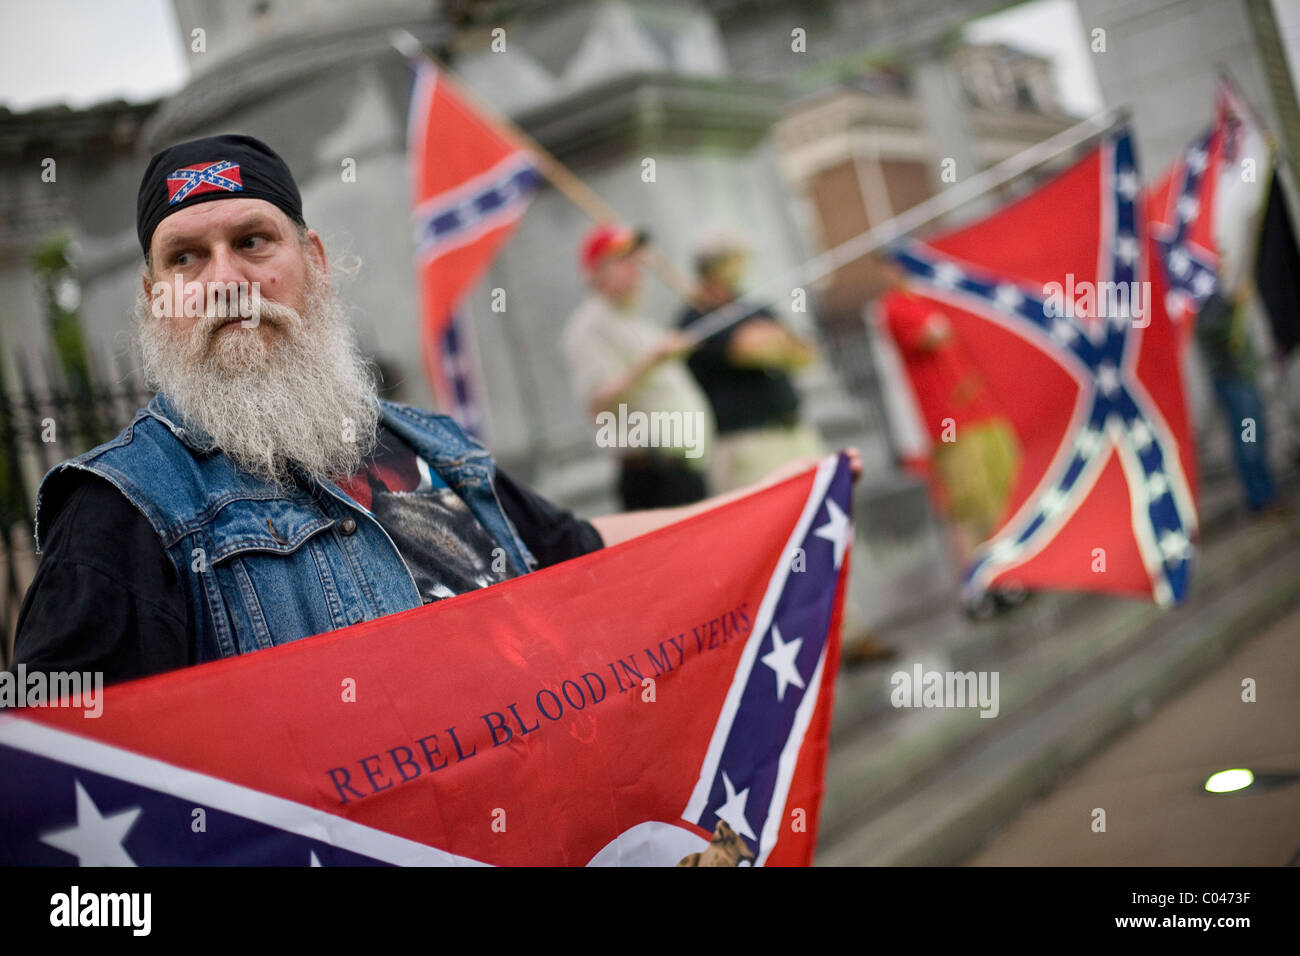 Confederate flag waivers stand in front of the Jefferson Davis statue on Monument Ave. in Richmond, Virginia, USA. Stock Photo